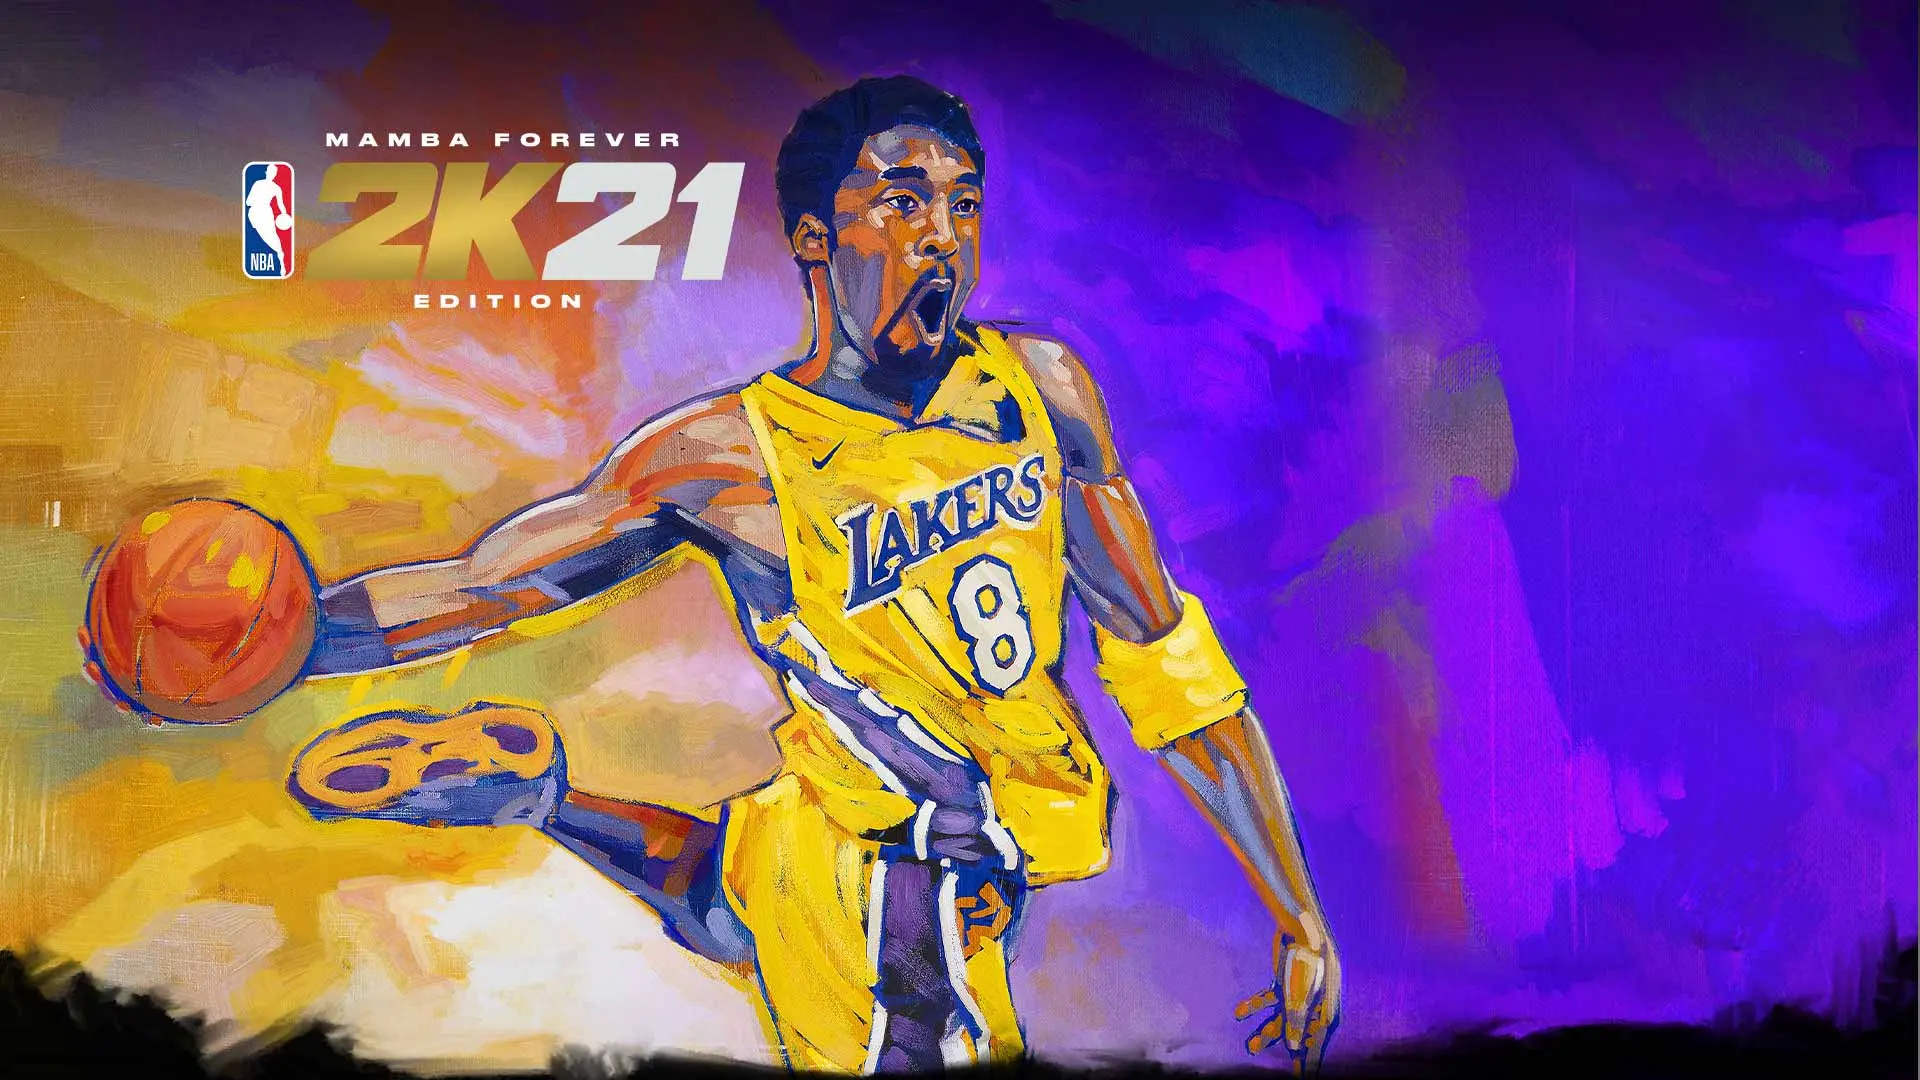 NBA 2K21 Mamba Forever Edition PS4 cover art